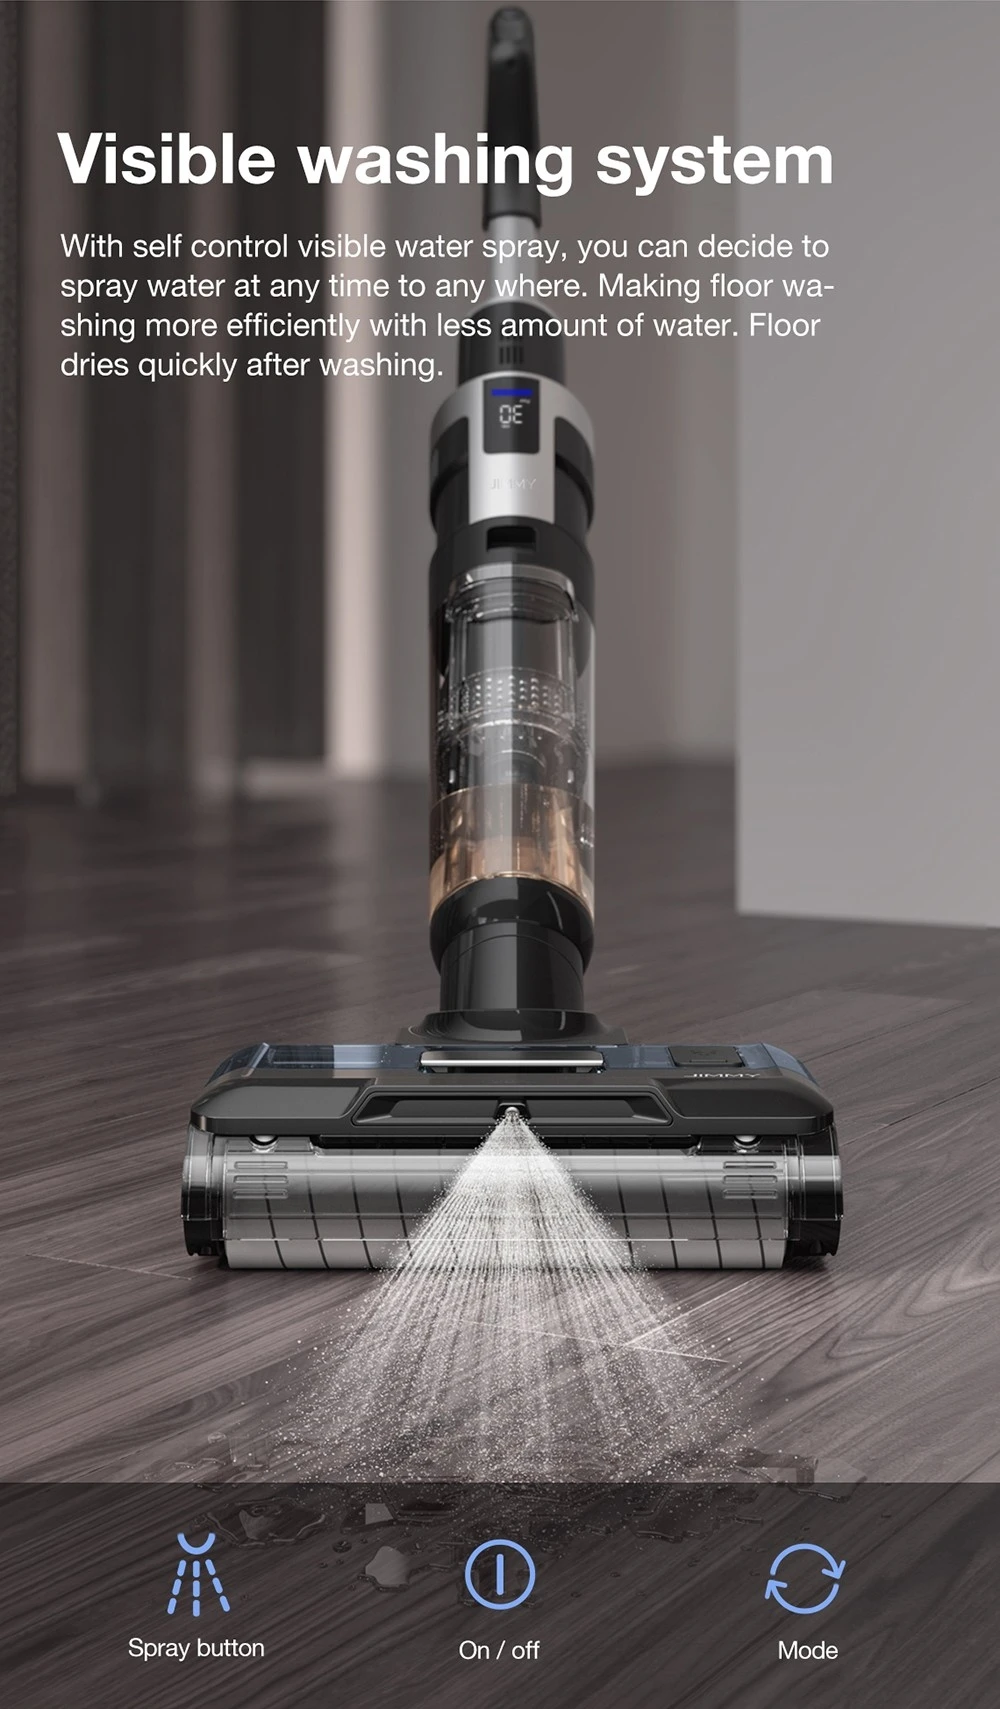 JIMMY HW9 Cordless Wet and Dry Vacuum Cleaner, Self-Cleaning, 400ml Dust Water Tank, Waterproof Brushless Motor, Water Spray Control, LED Display